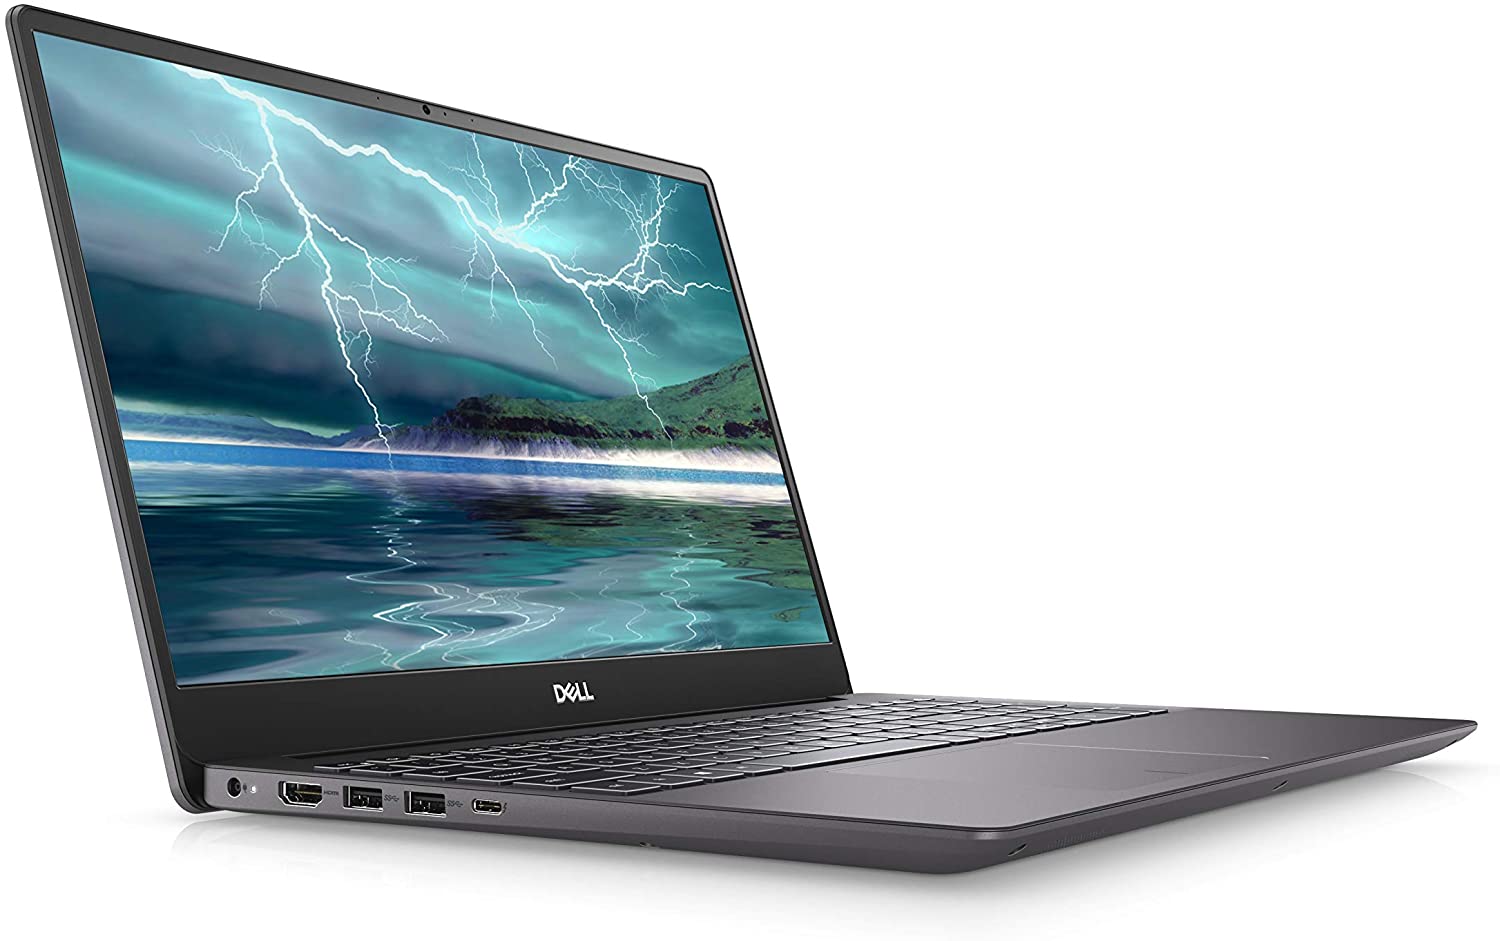  Dell Inspiron 15: A Budget-Friendly Laptop For Everyday Tasks